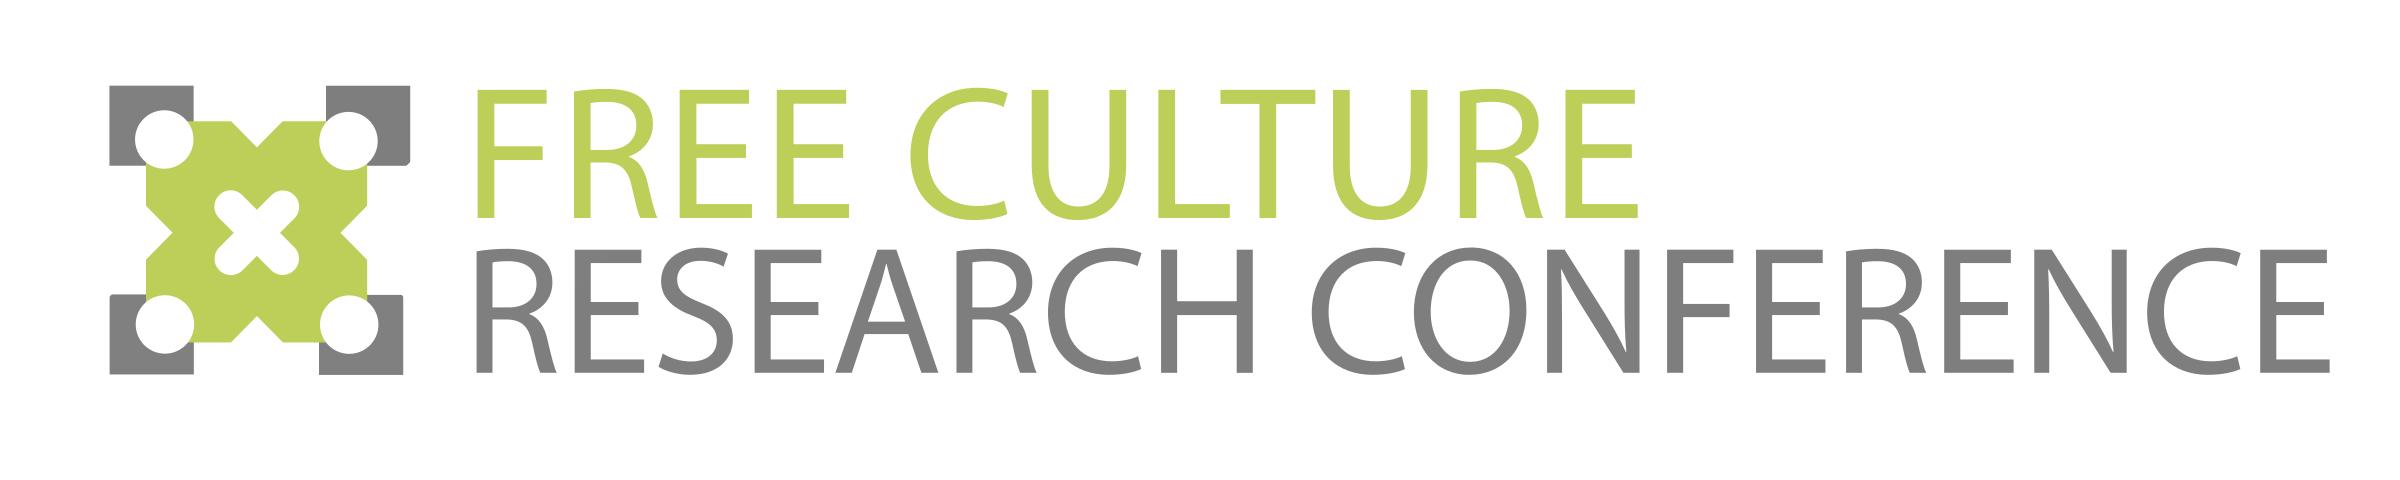 Free Culture Research Conference Logo 5 icons